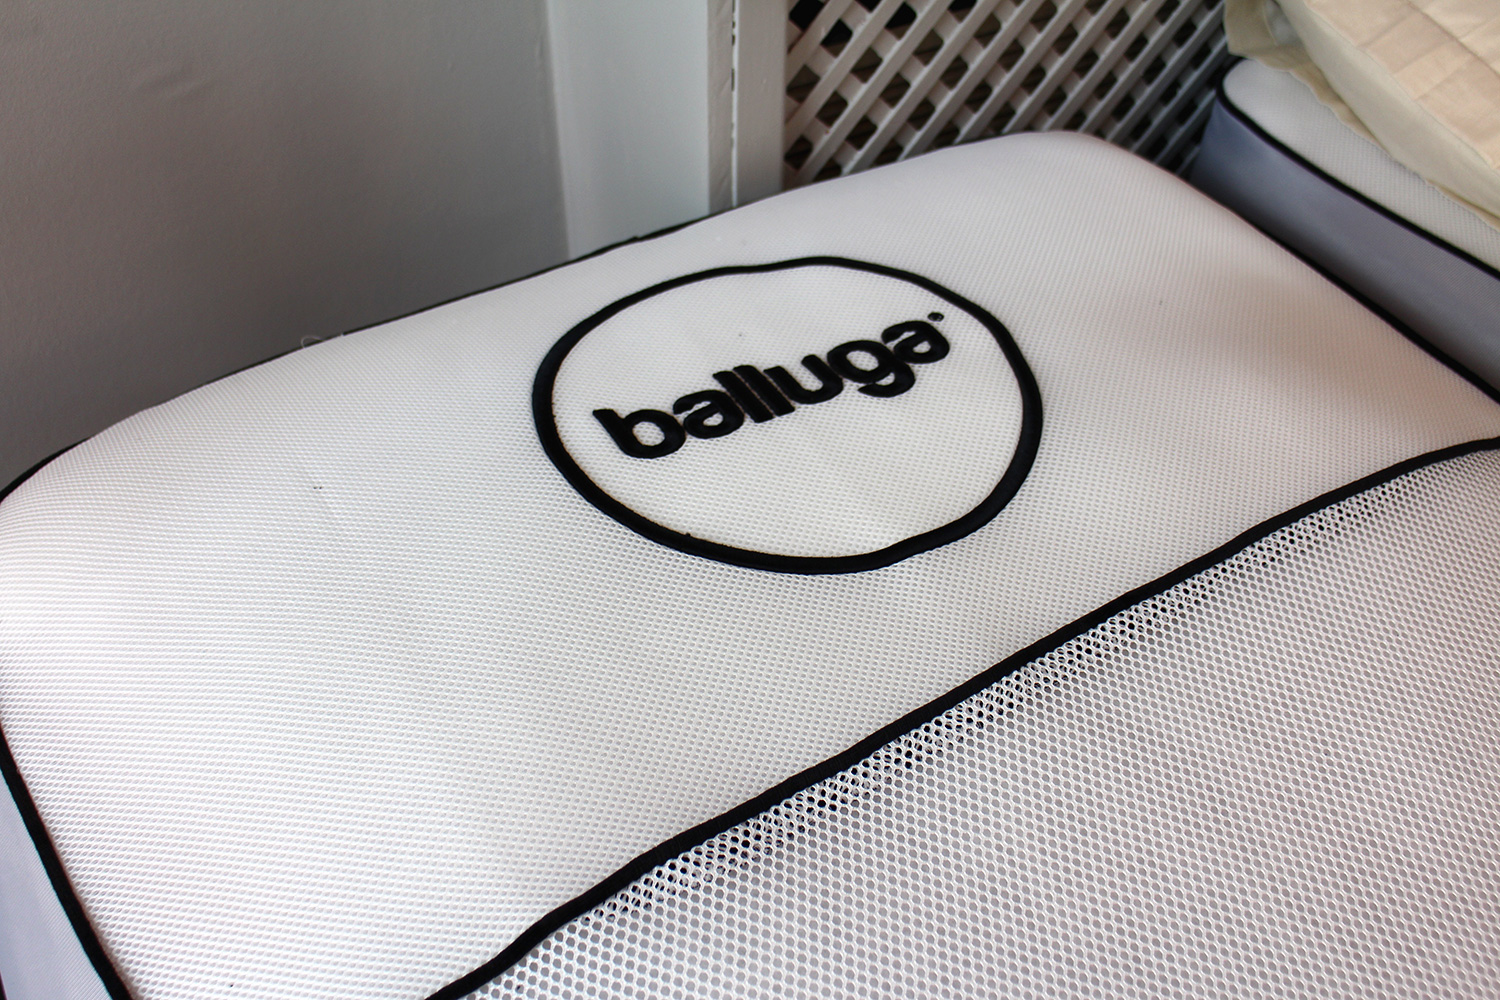 balluga is a smart bed with ac and air suspension 1173